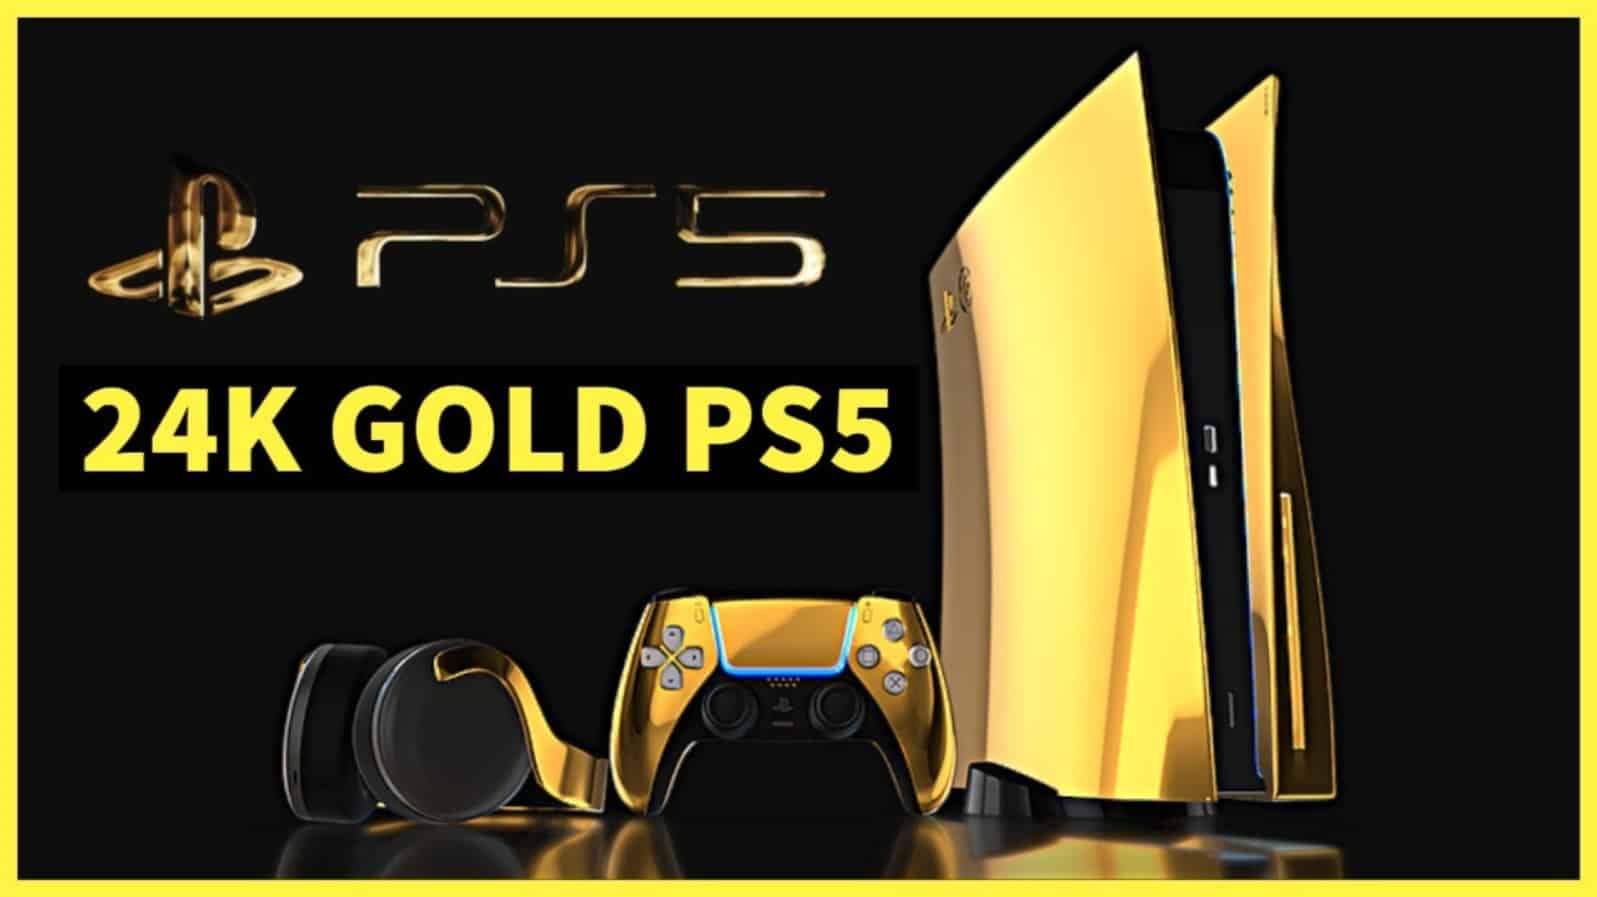 Включи золотая 3. Ps5 Gold. PLAYSTATION 5 Gold. Sony ps5 золотые. PS 5 Gold Limited Edition.